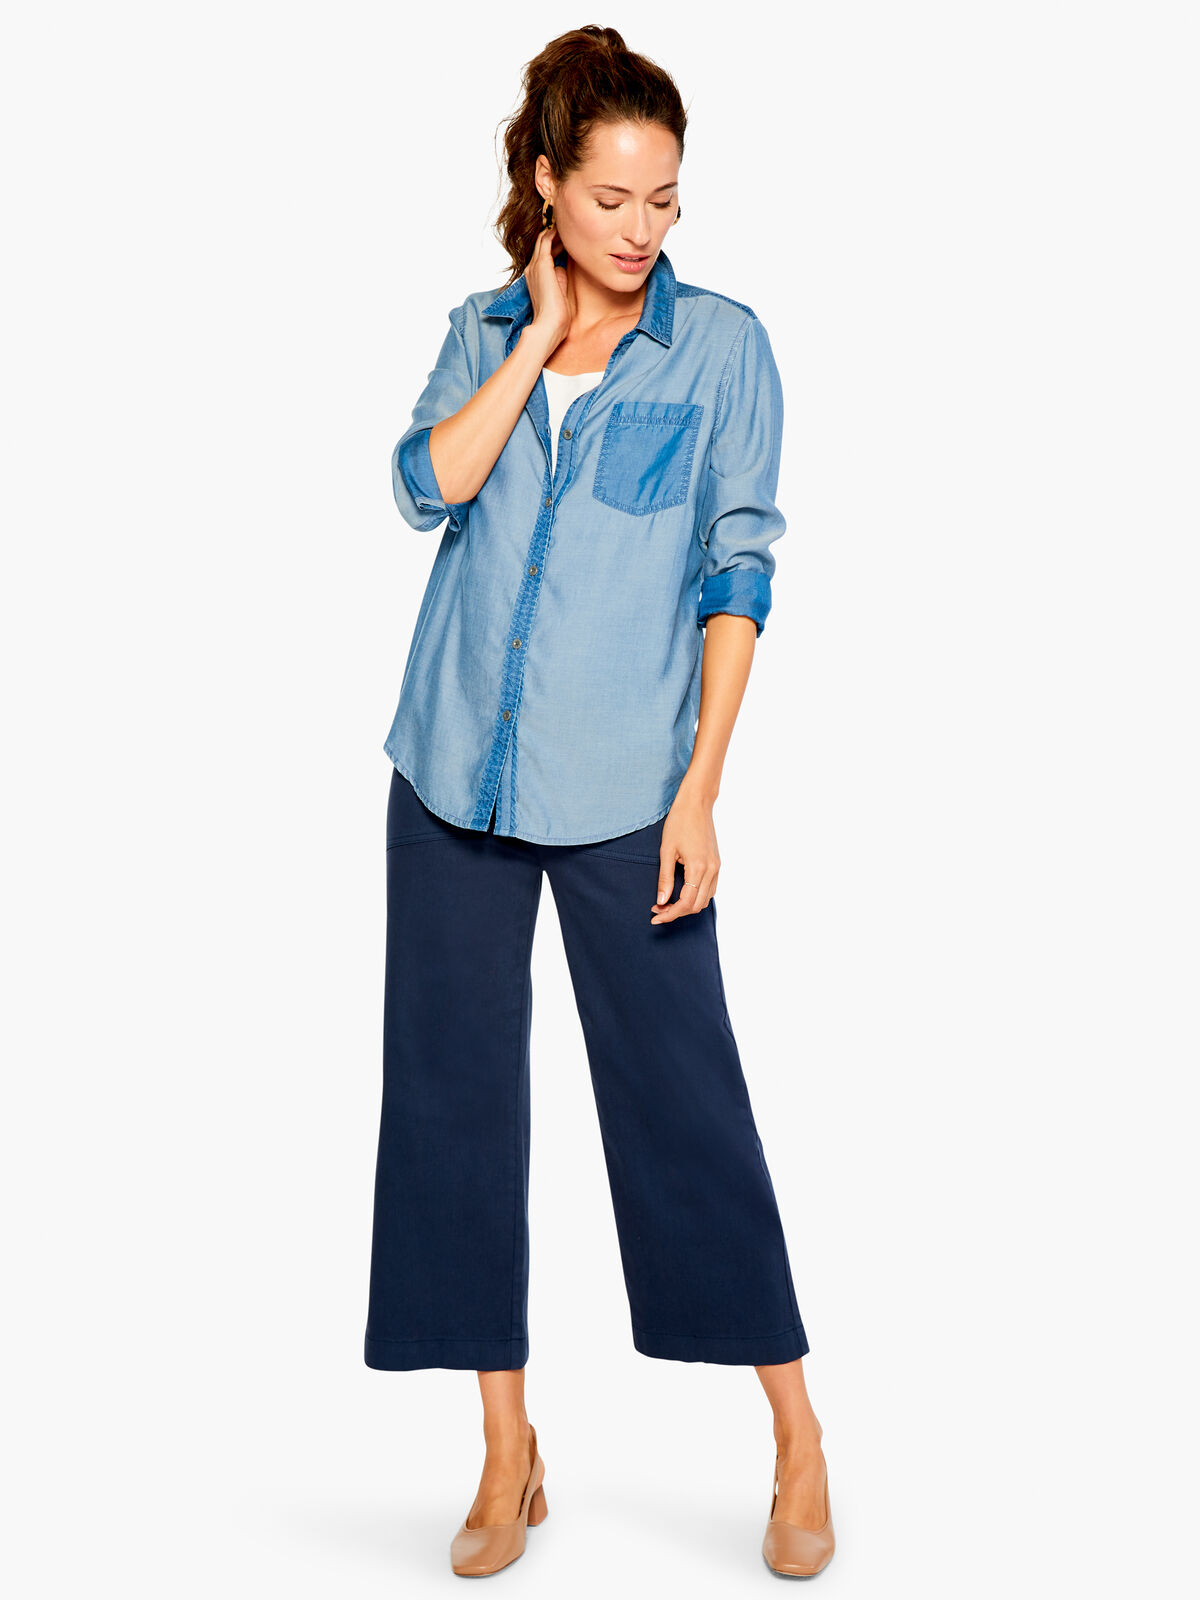 All Day Slim Wide Crop Pant